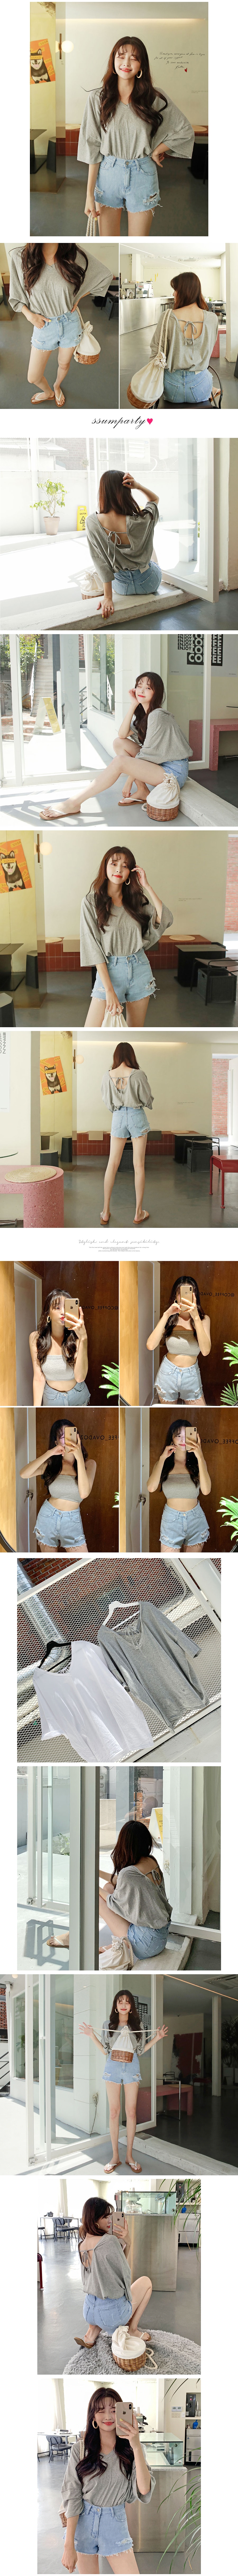 V-Neck Tie Back T-Shirt+Crop Tube Top 2 Pieces Set #Grey One Size(Free)